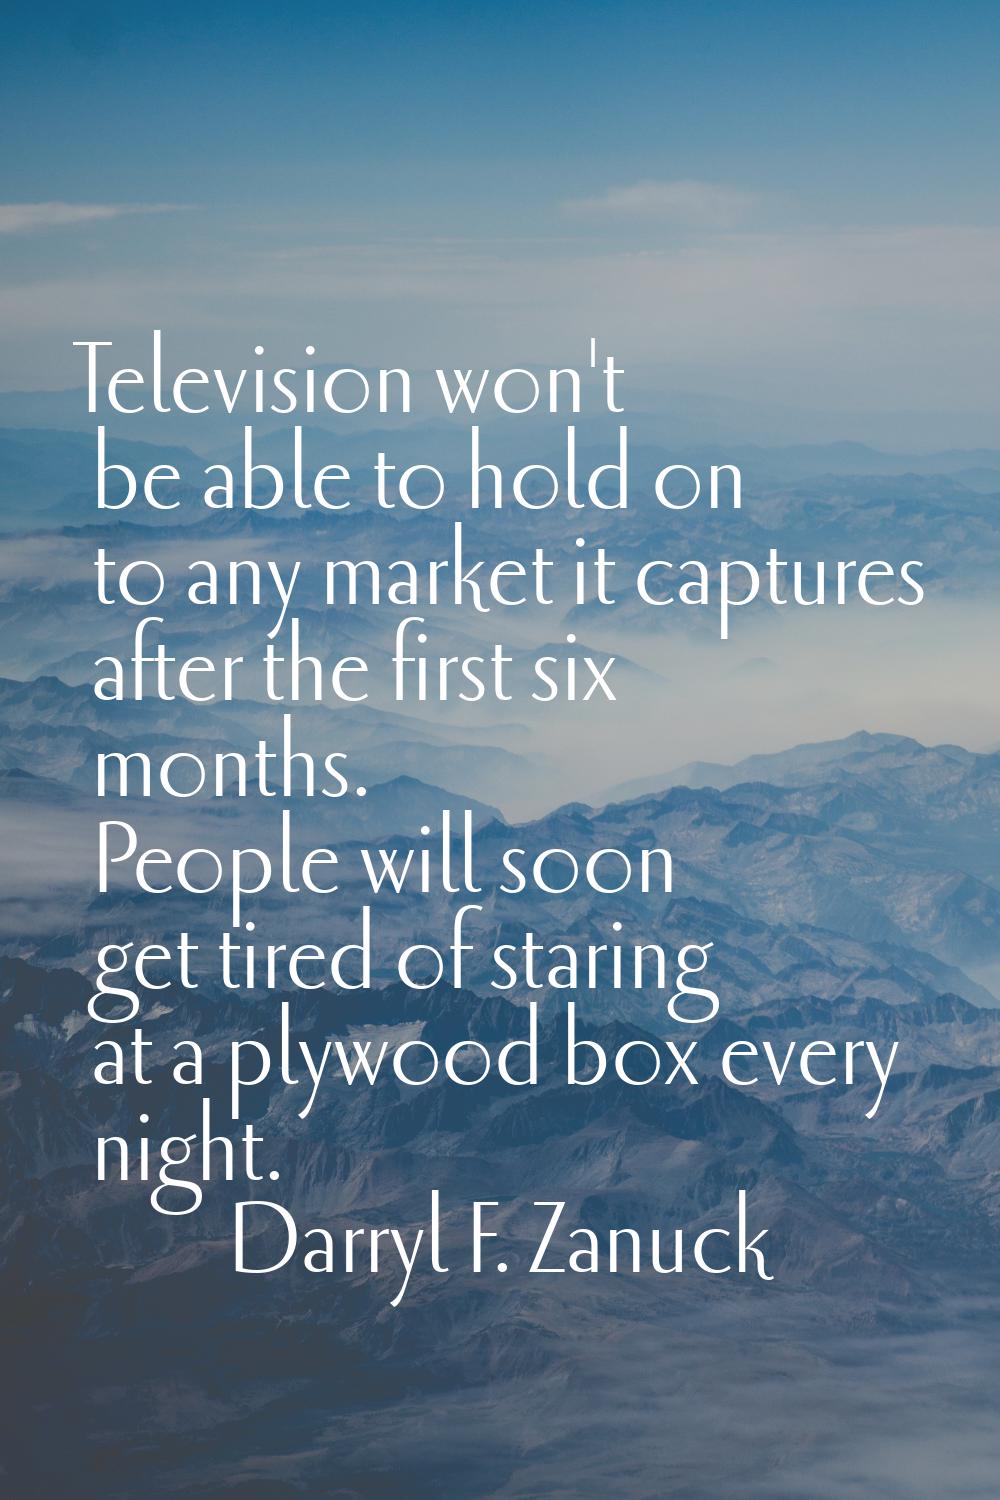 Television won't be able to hold on to any market it captures after the first six months. People wi